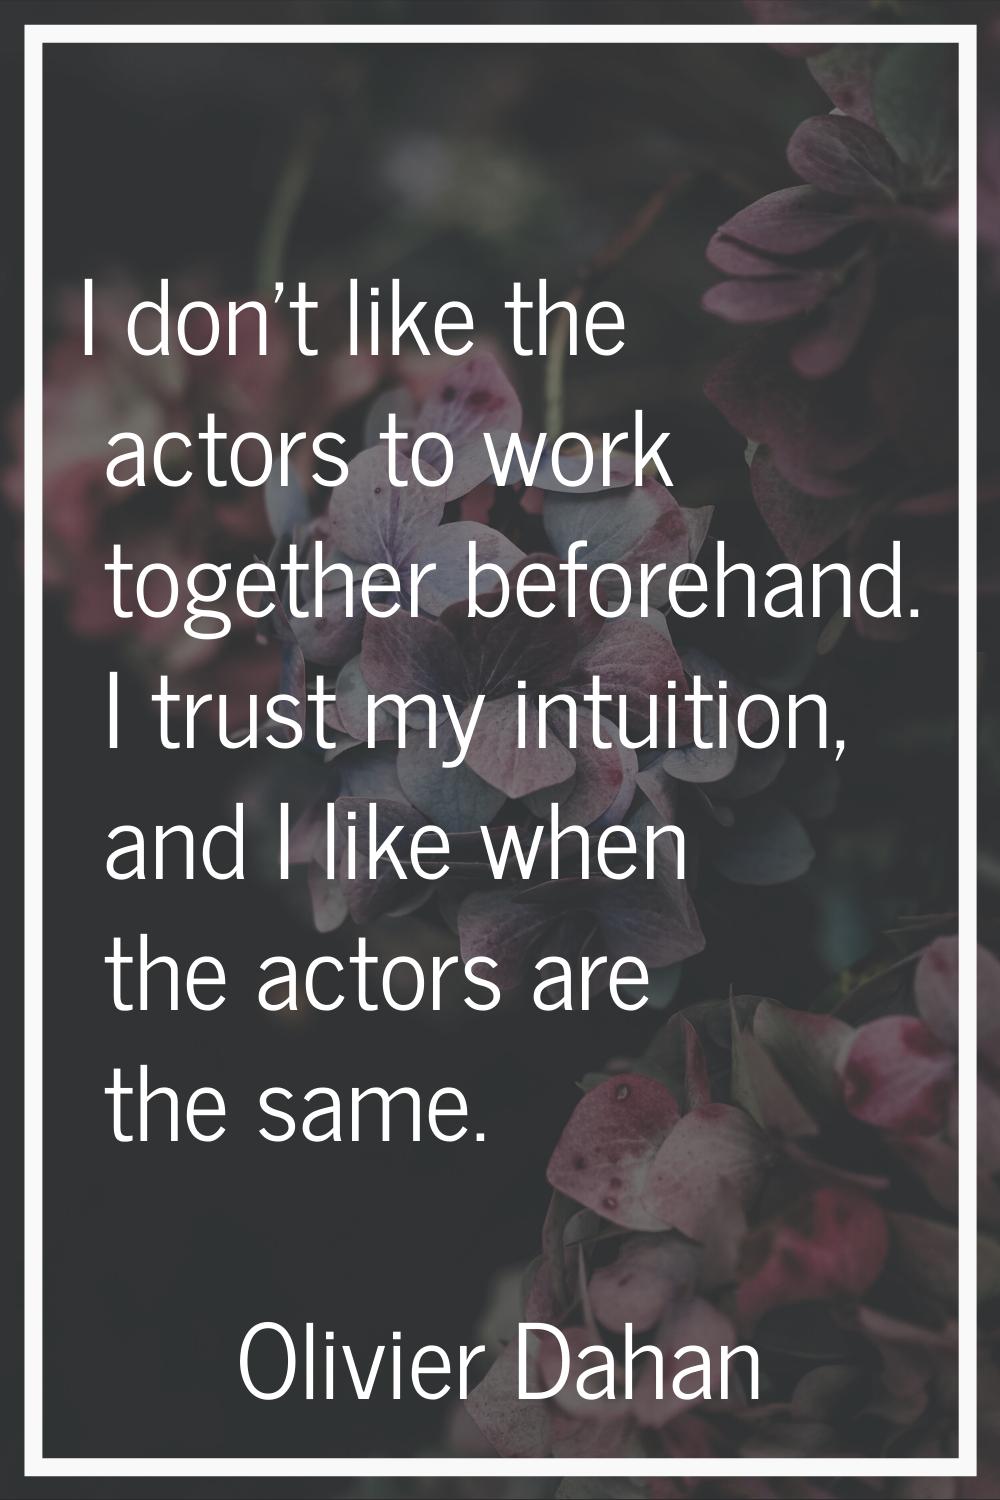 I don't like the actors to work together beforehand. I trust my intuition, and I like when the acto